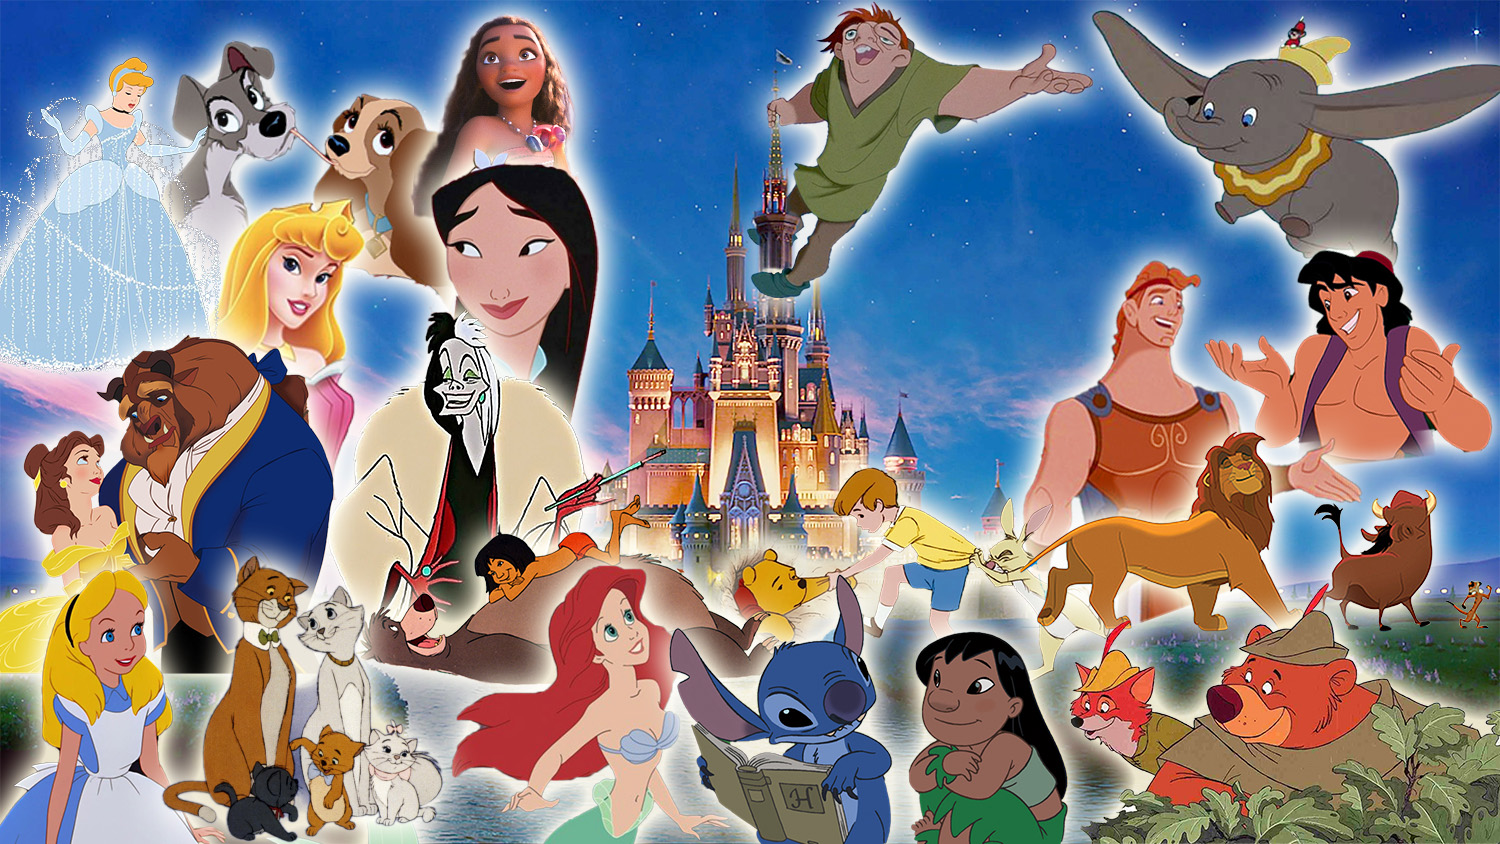 How Former Disney Animators Feel About Those Live-Action Movie Remakes